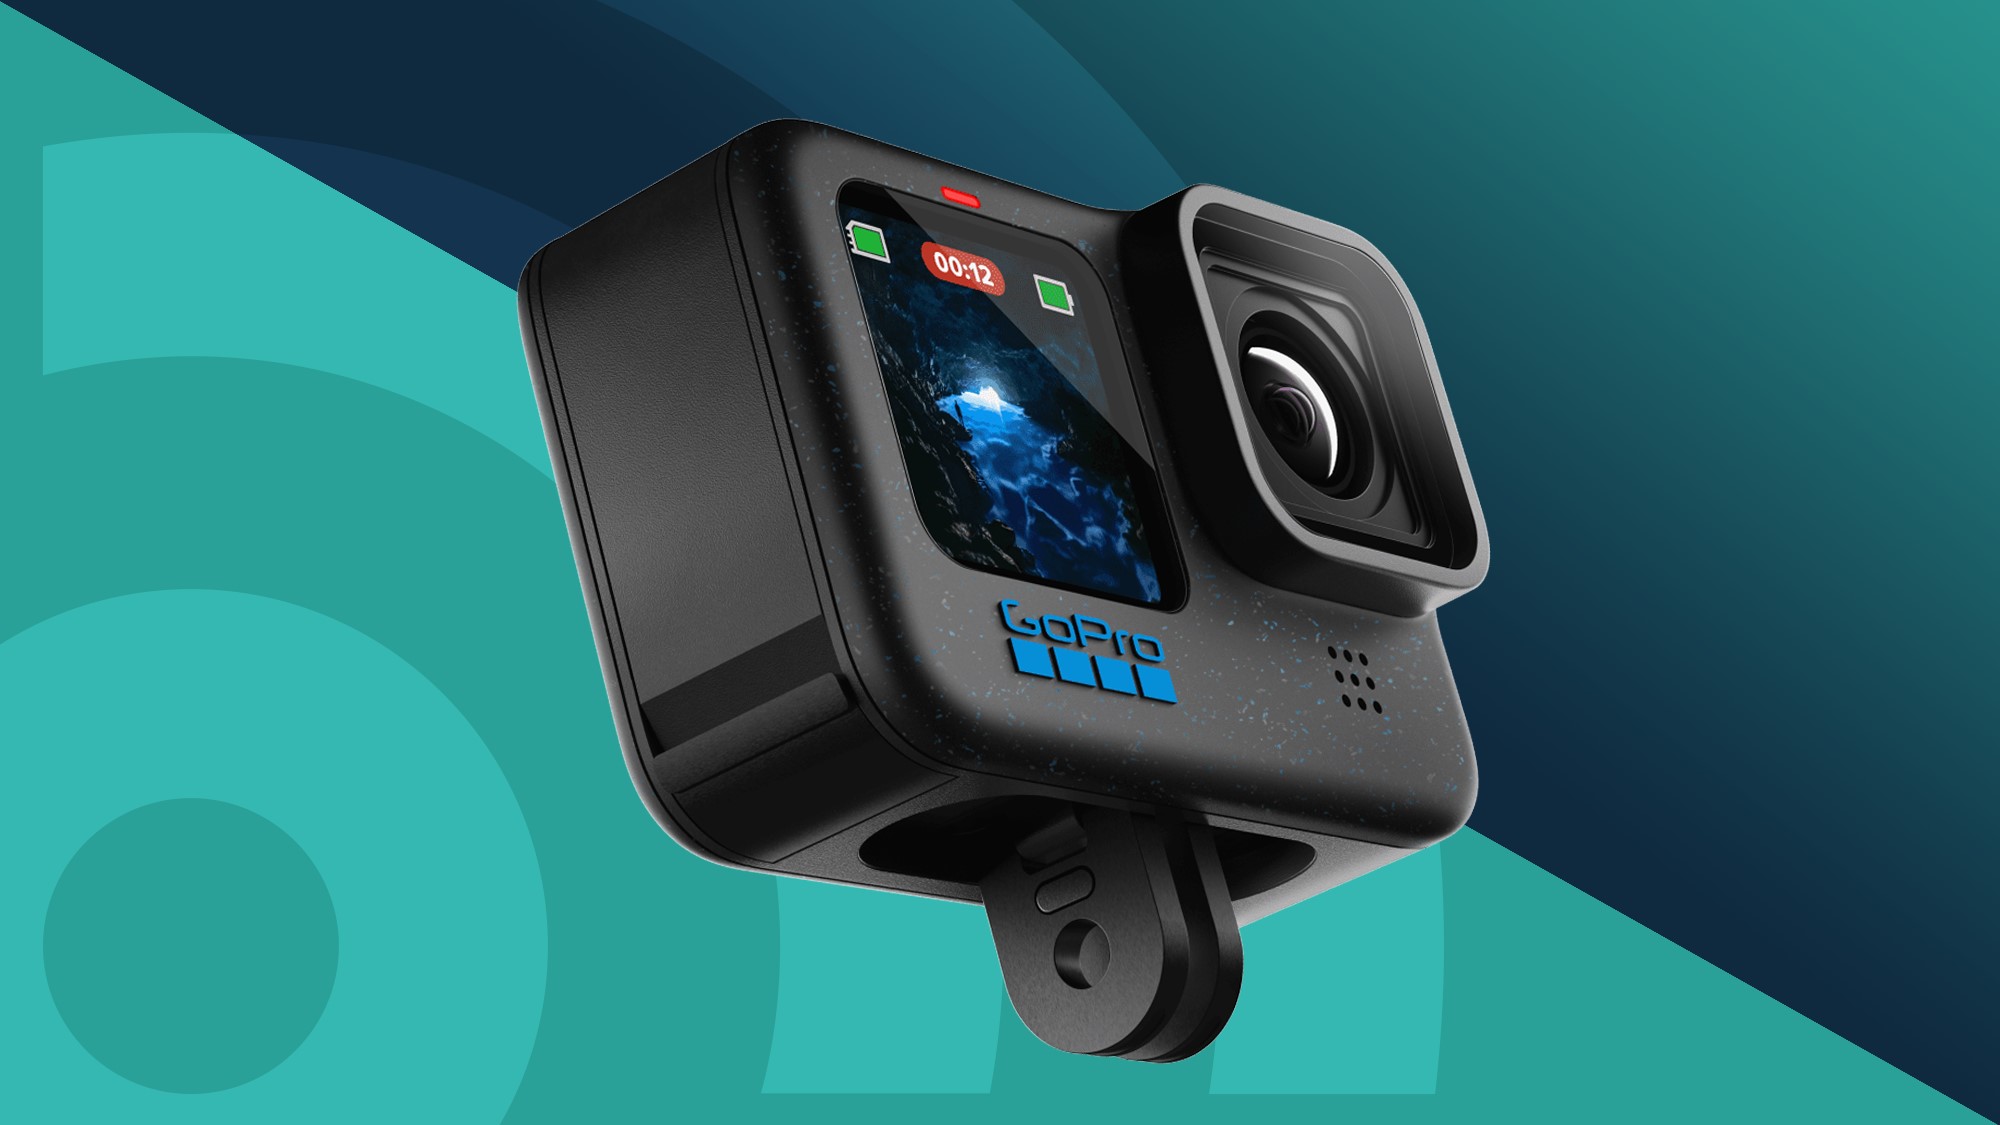 GoPro Action Camera Review: Unbiased Analysis and Ratings